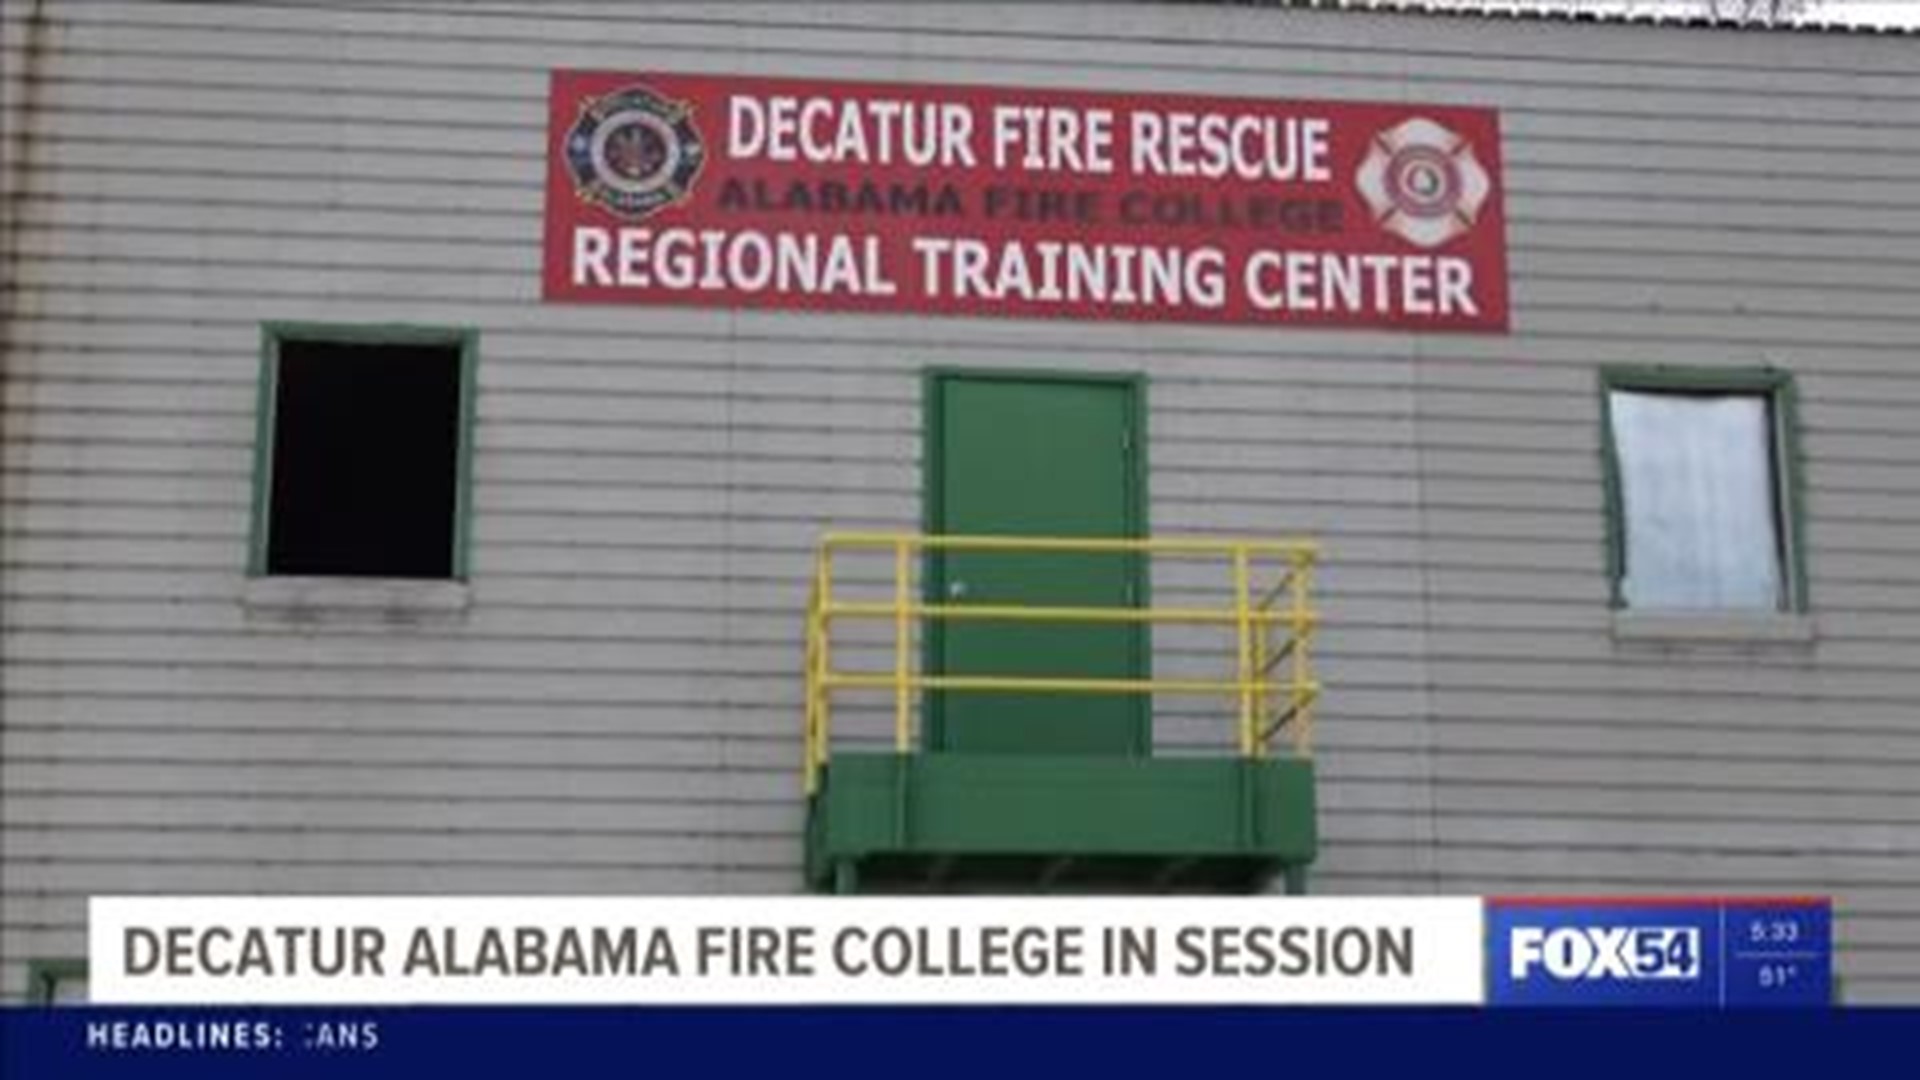 New firefighter recruits started their training with Alabama Fire College and Decatur Fire & Rescue.